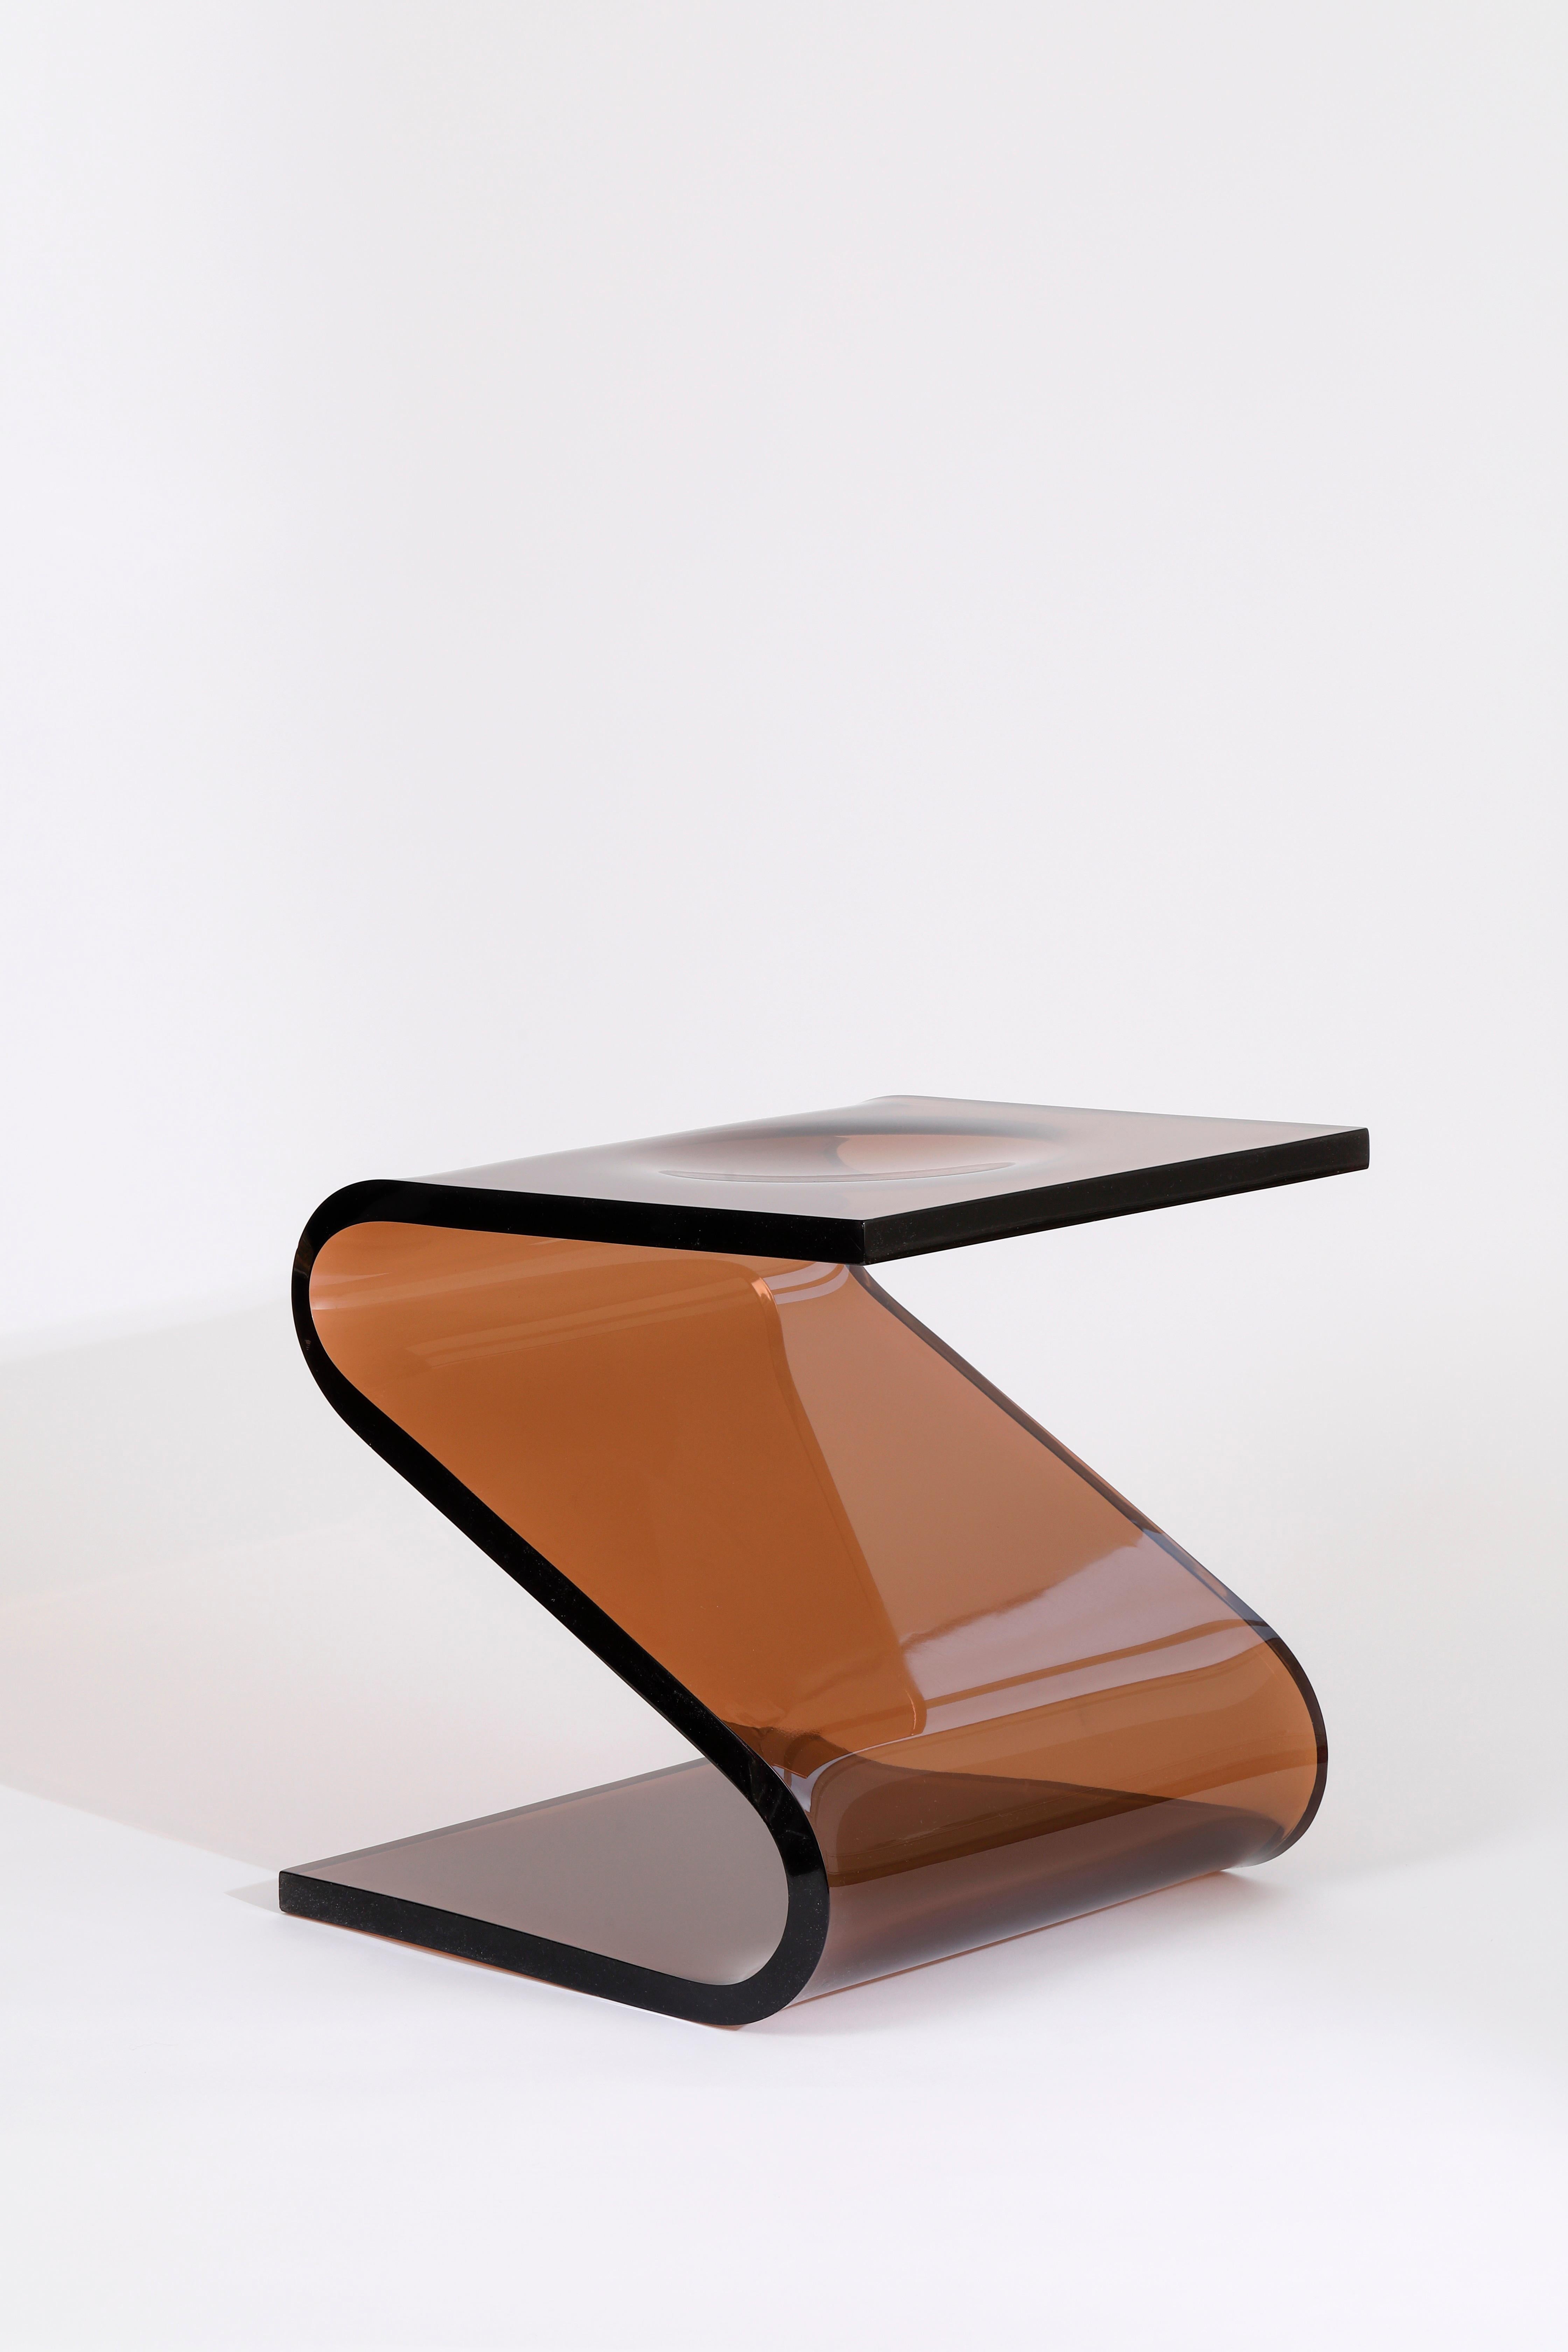 Z stool by François Arnal, Atelier A, manufactured by Mobilier Modulaire Moderne, France, 1970